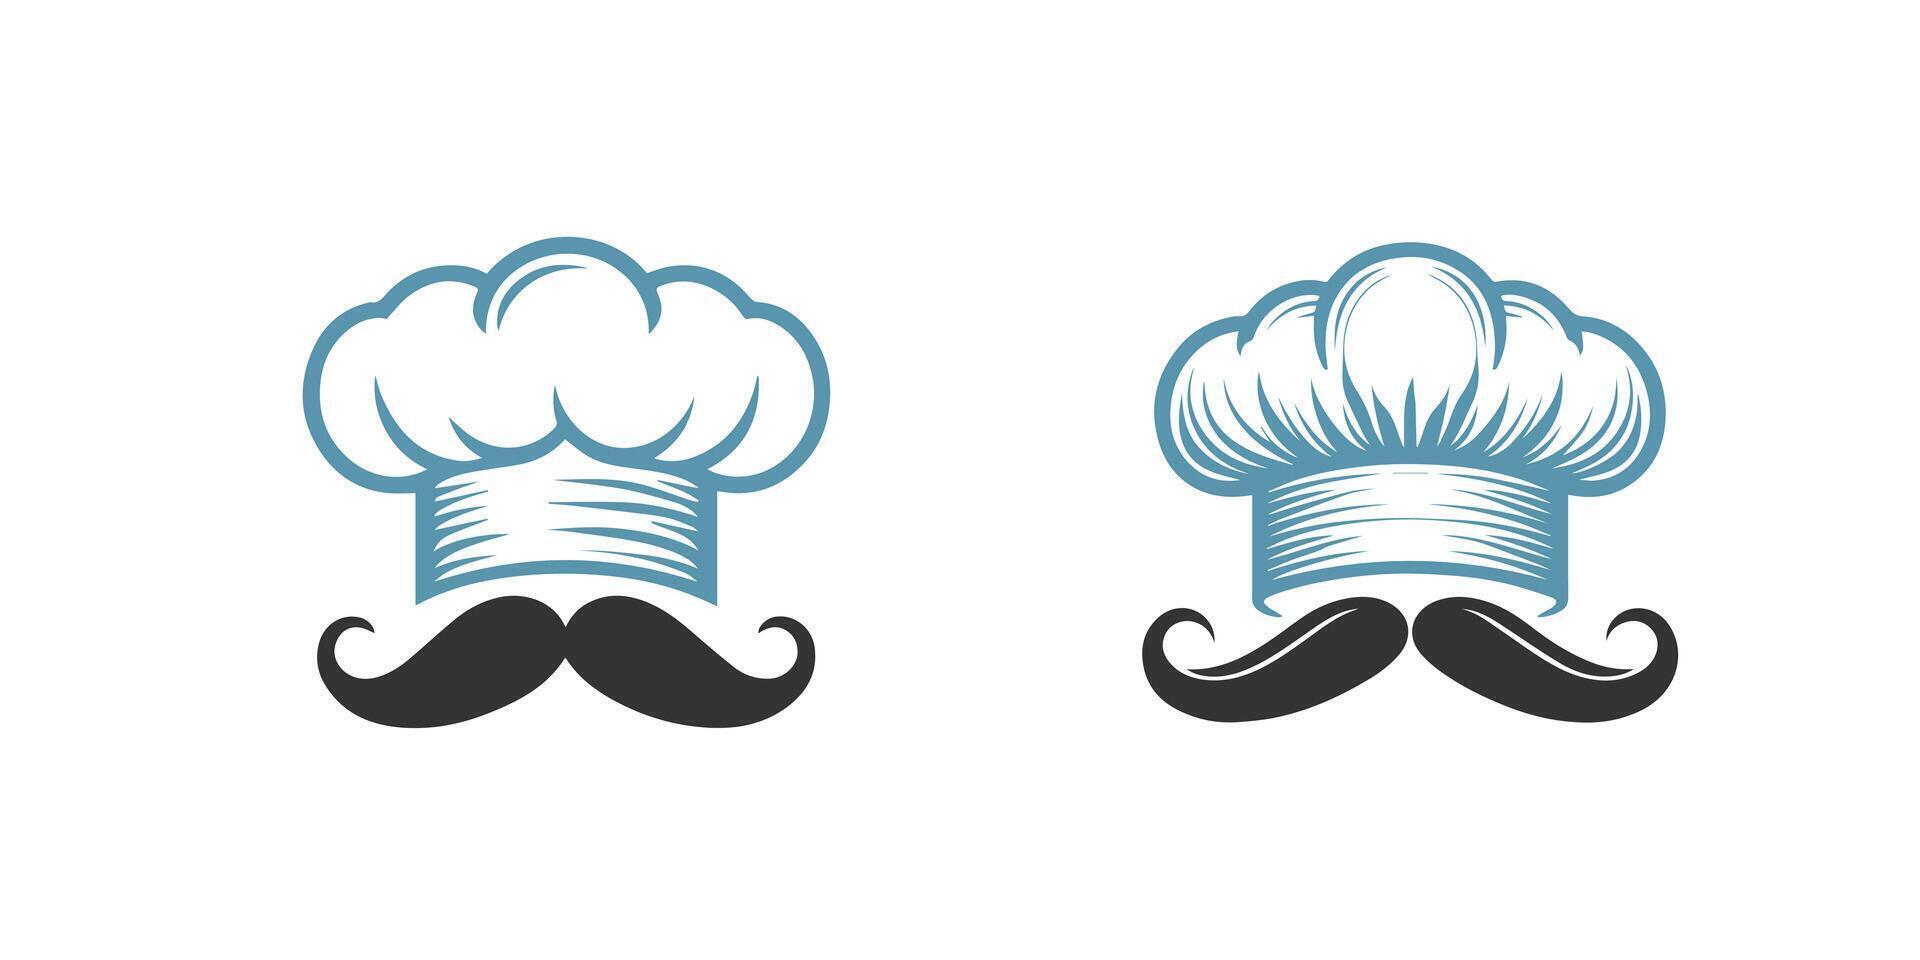 Twin Chefs Hats With Stylish Mustaches Symbolizing Culinary Expertise and Identity vector